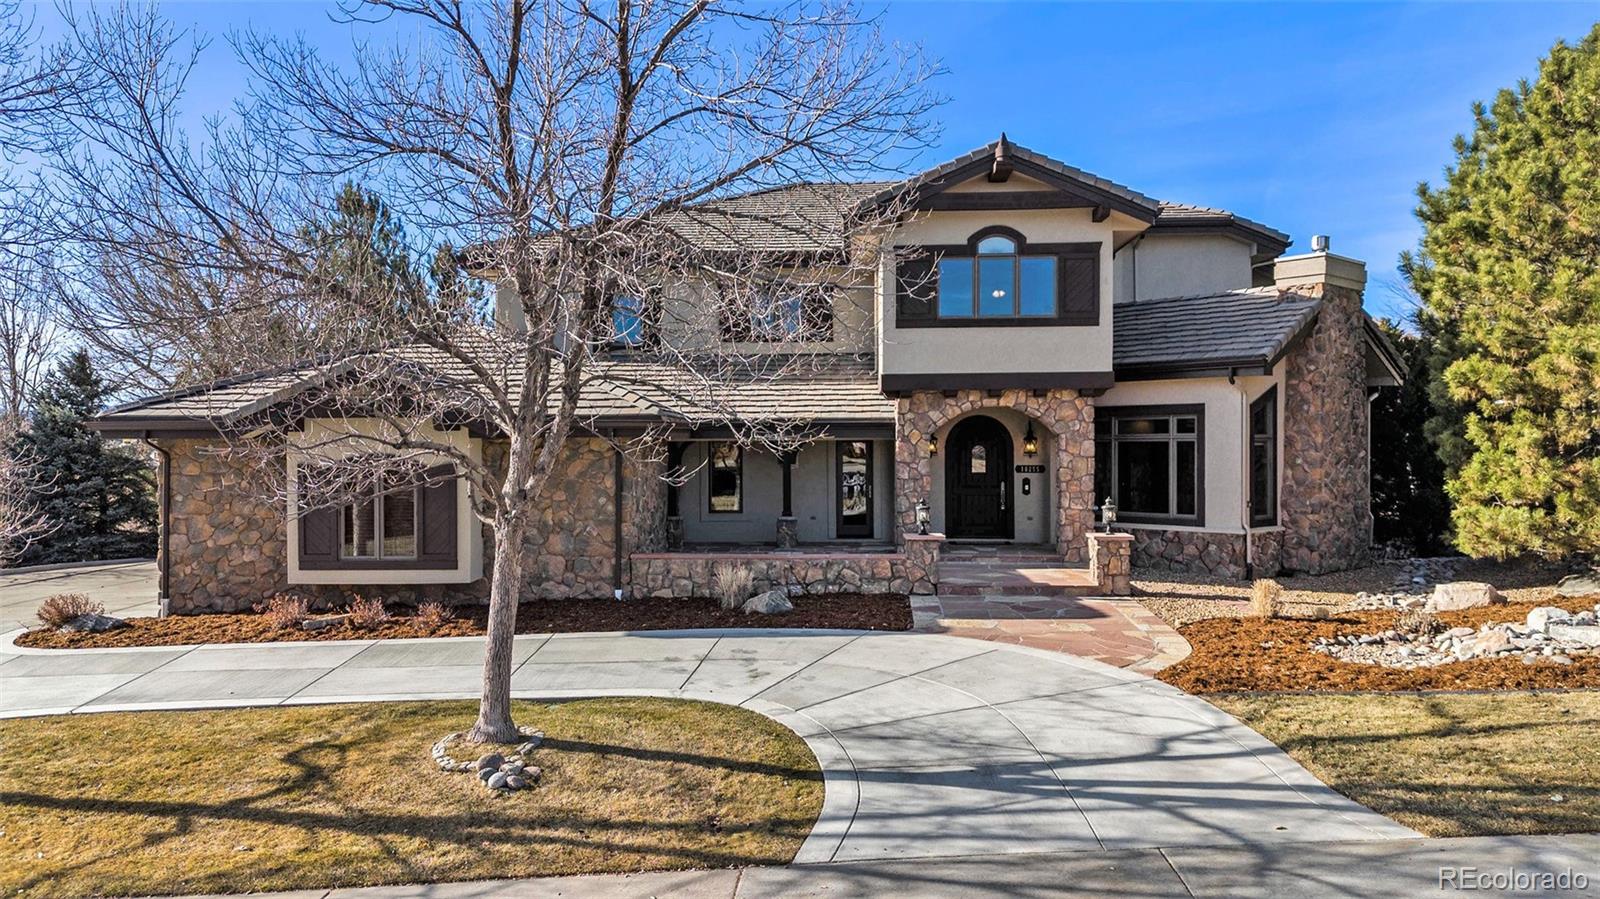 Report Image for 10255  Dowling Court,Highlands Ranch, Colorado